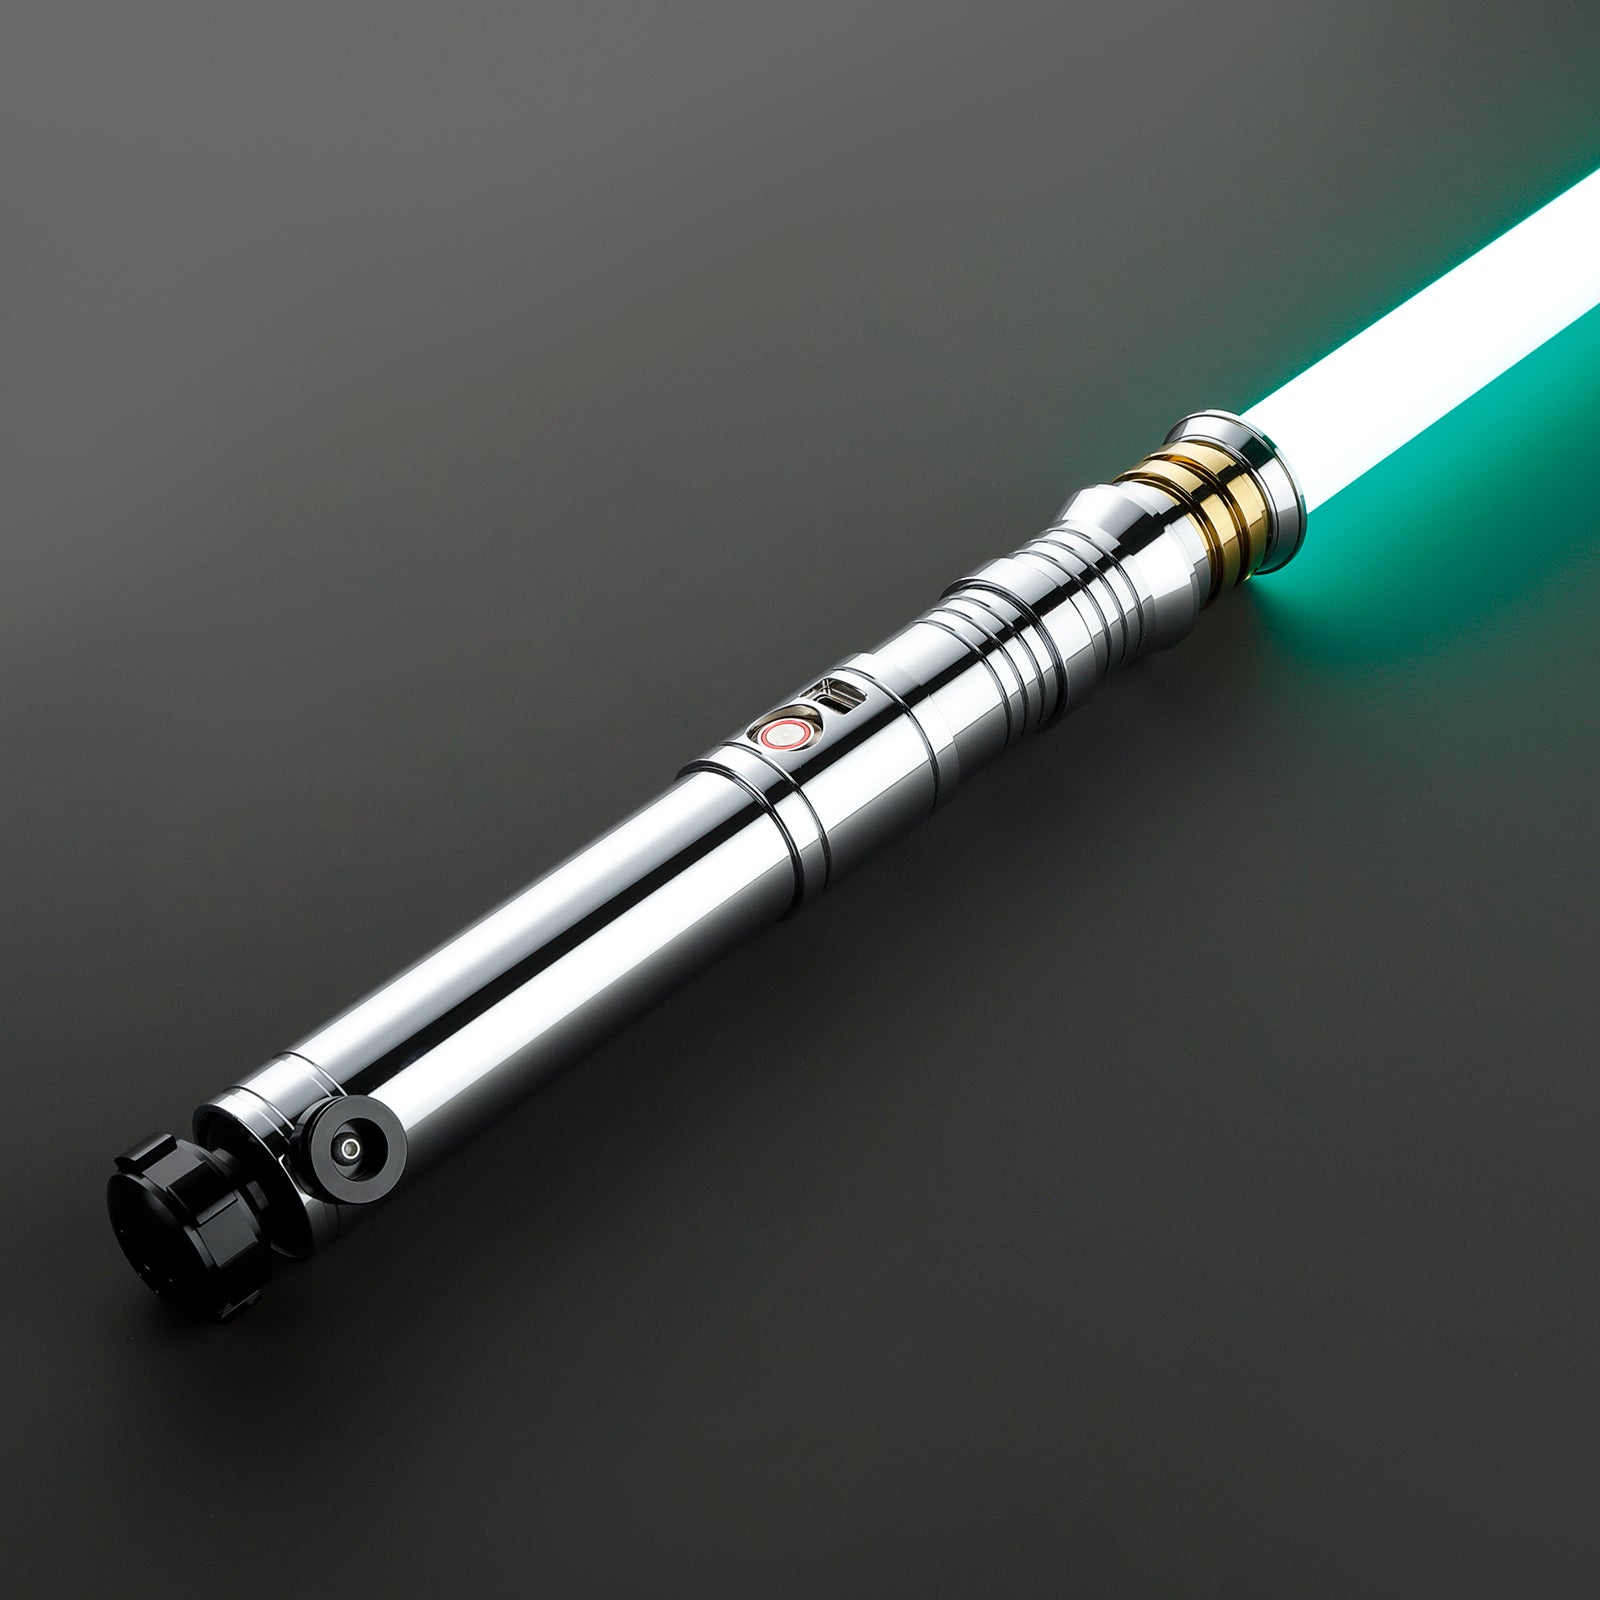 SaberCustom Darth Revan dueling lightsaber infinite color changing 12sound fonts smooth swing